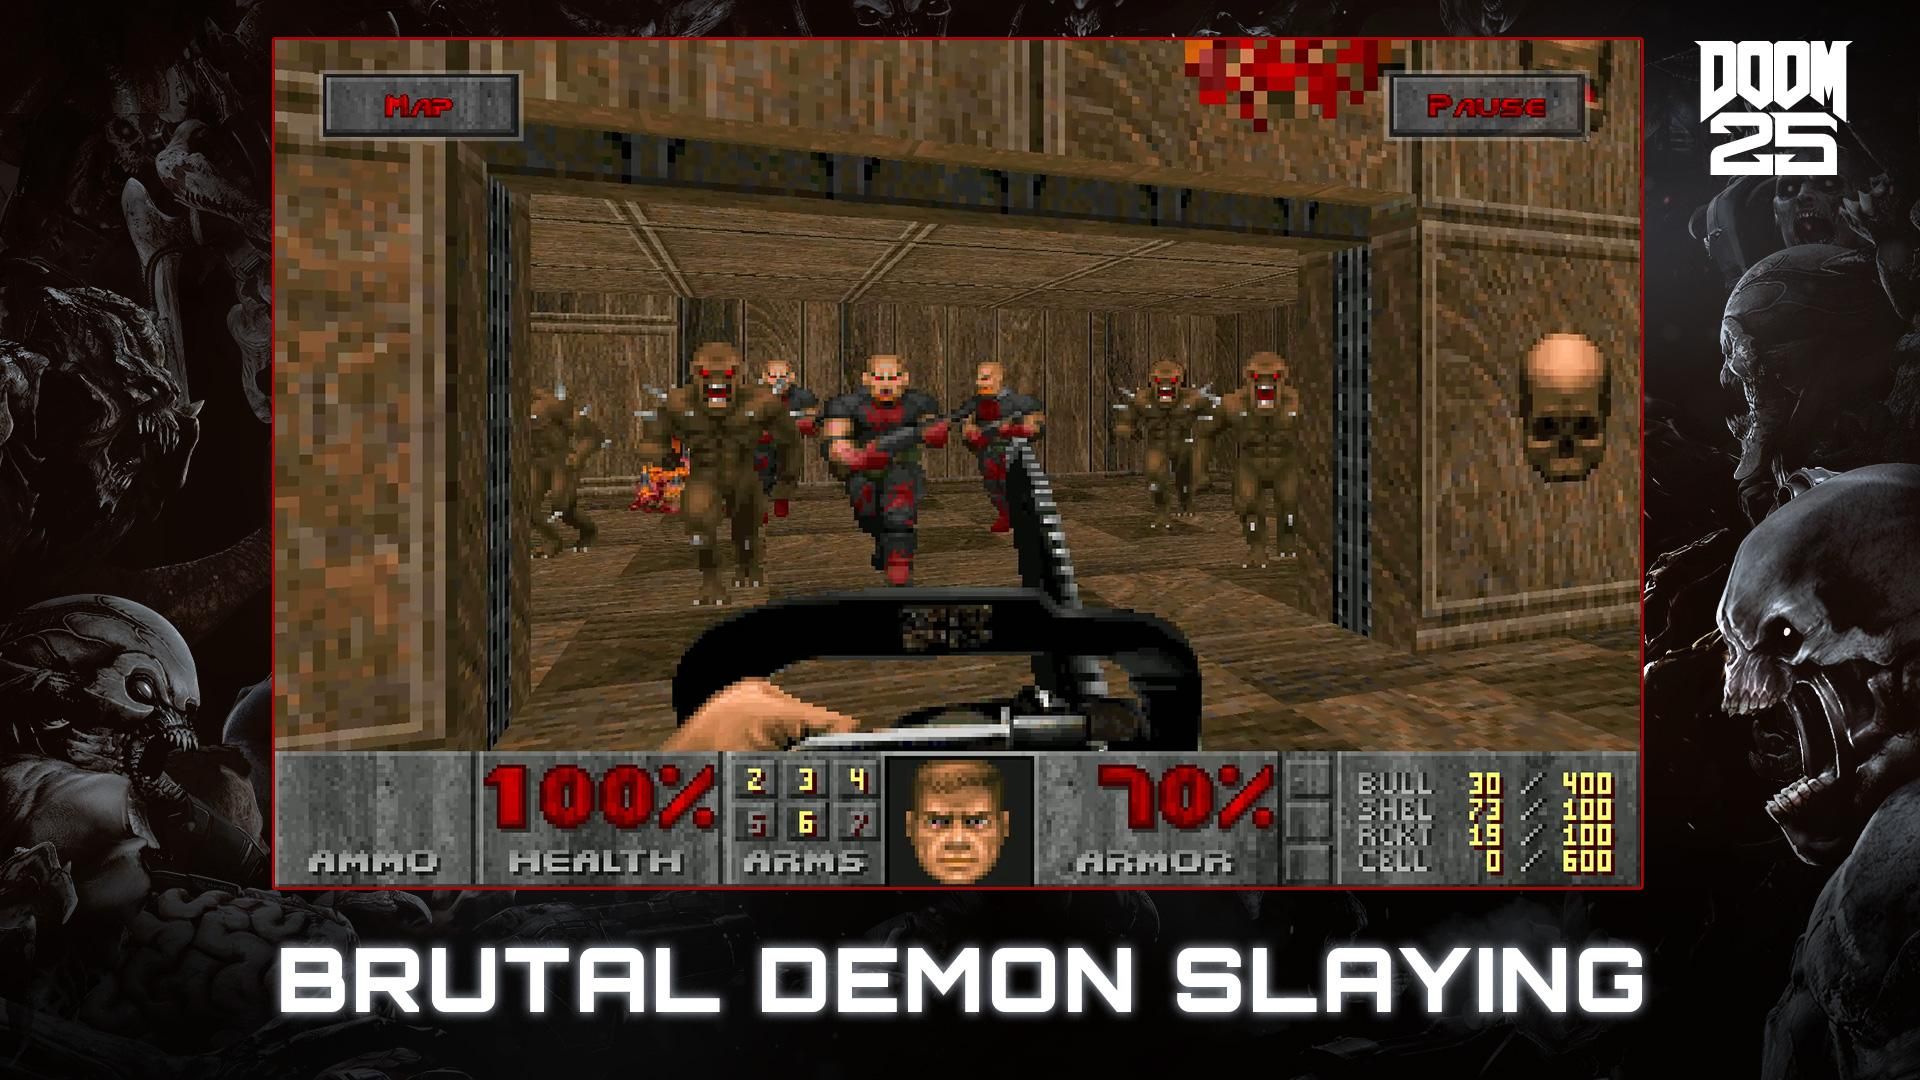 doom mobile port with centered screenshot displaying ammo, health, arms, armor and listed stats